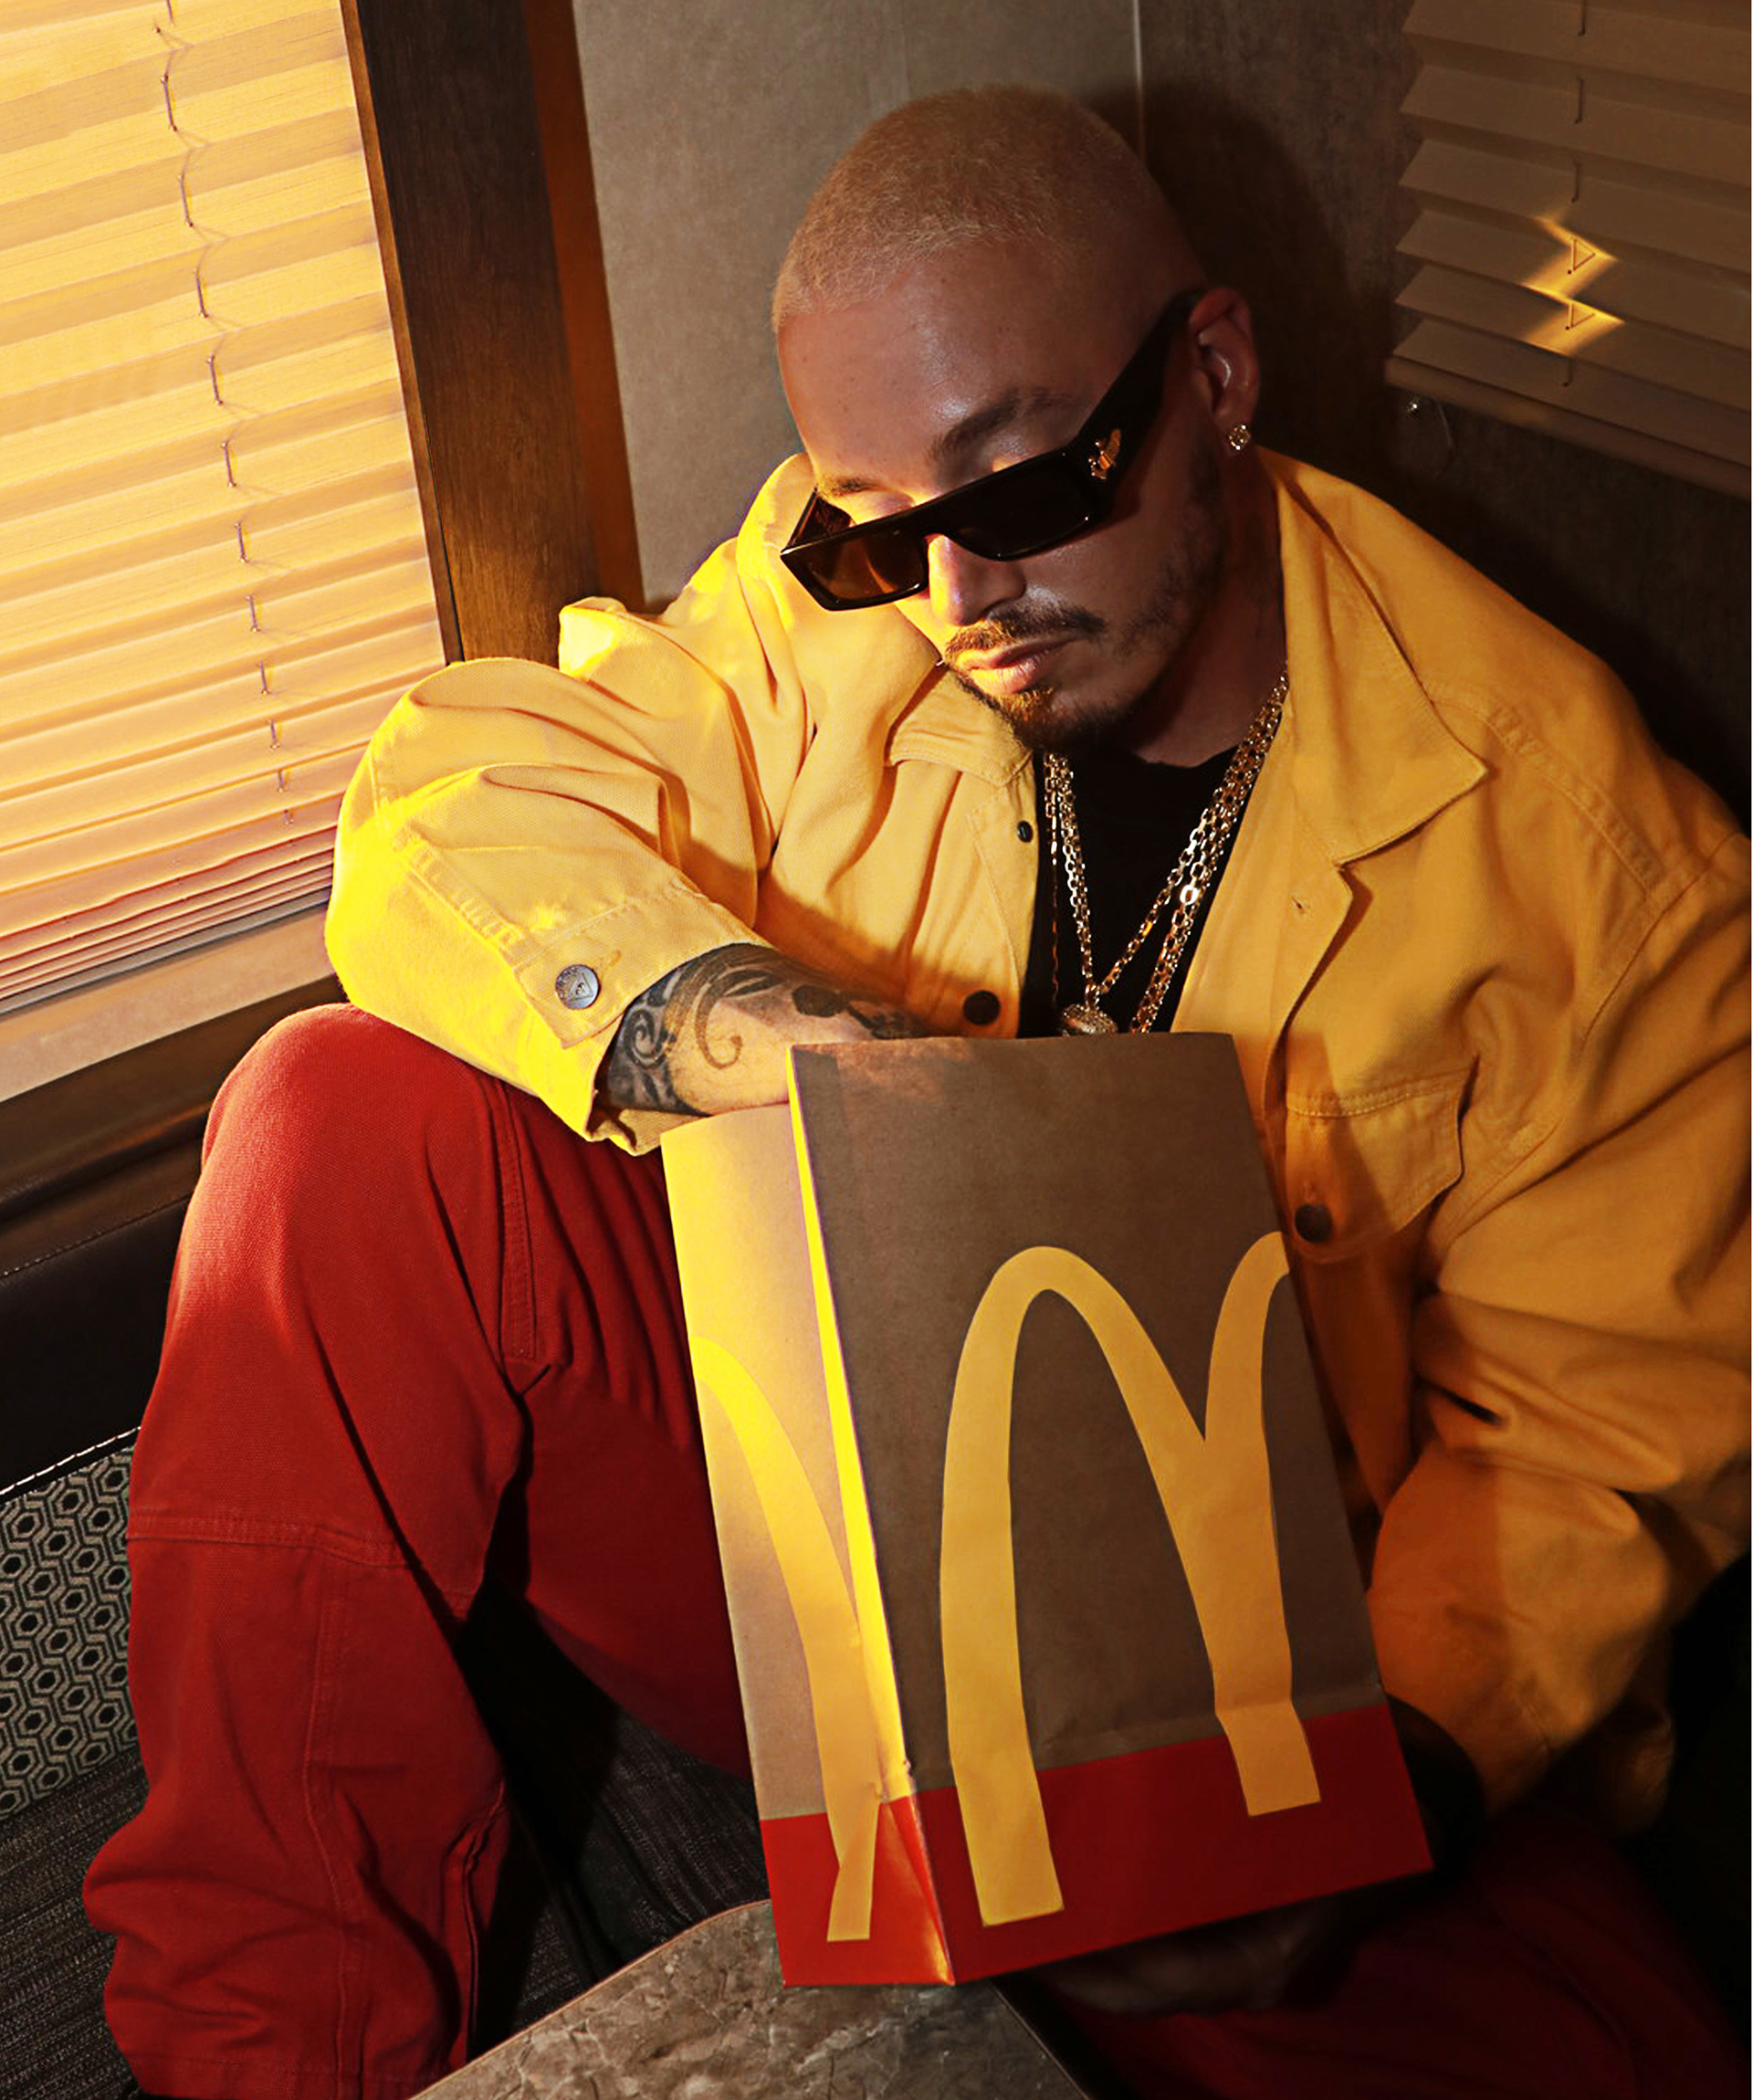 J Balvin Interview: His New McDonald's Deal And What's Next